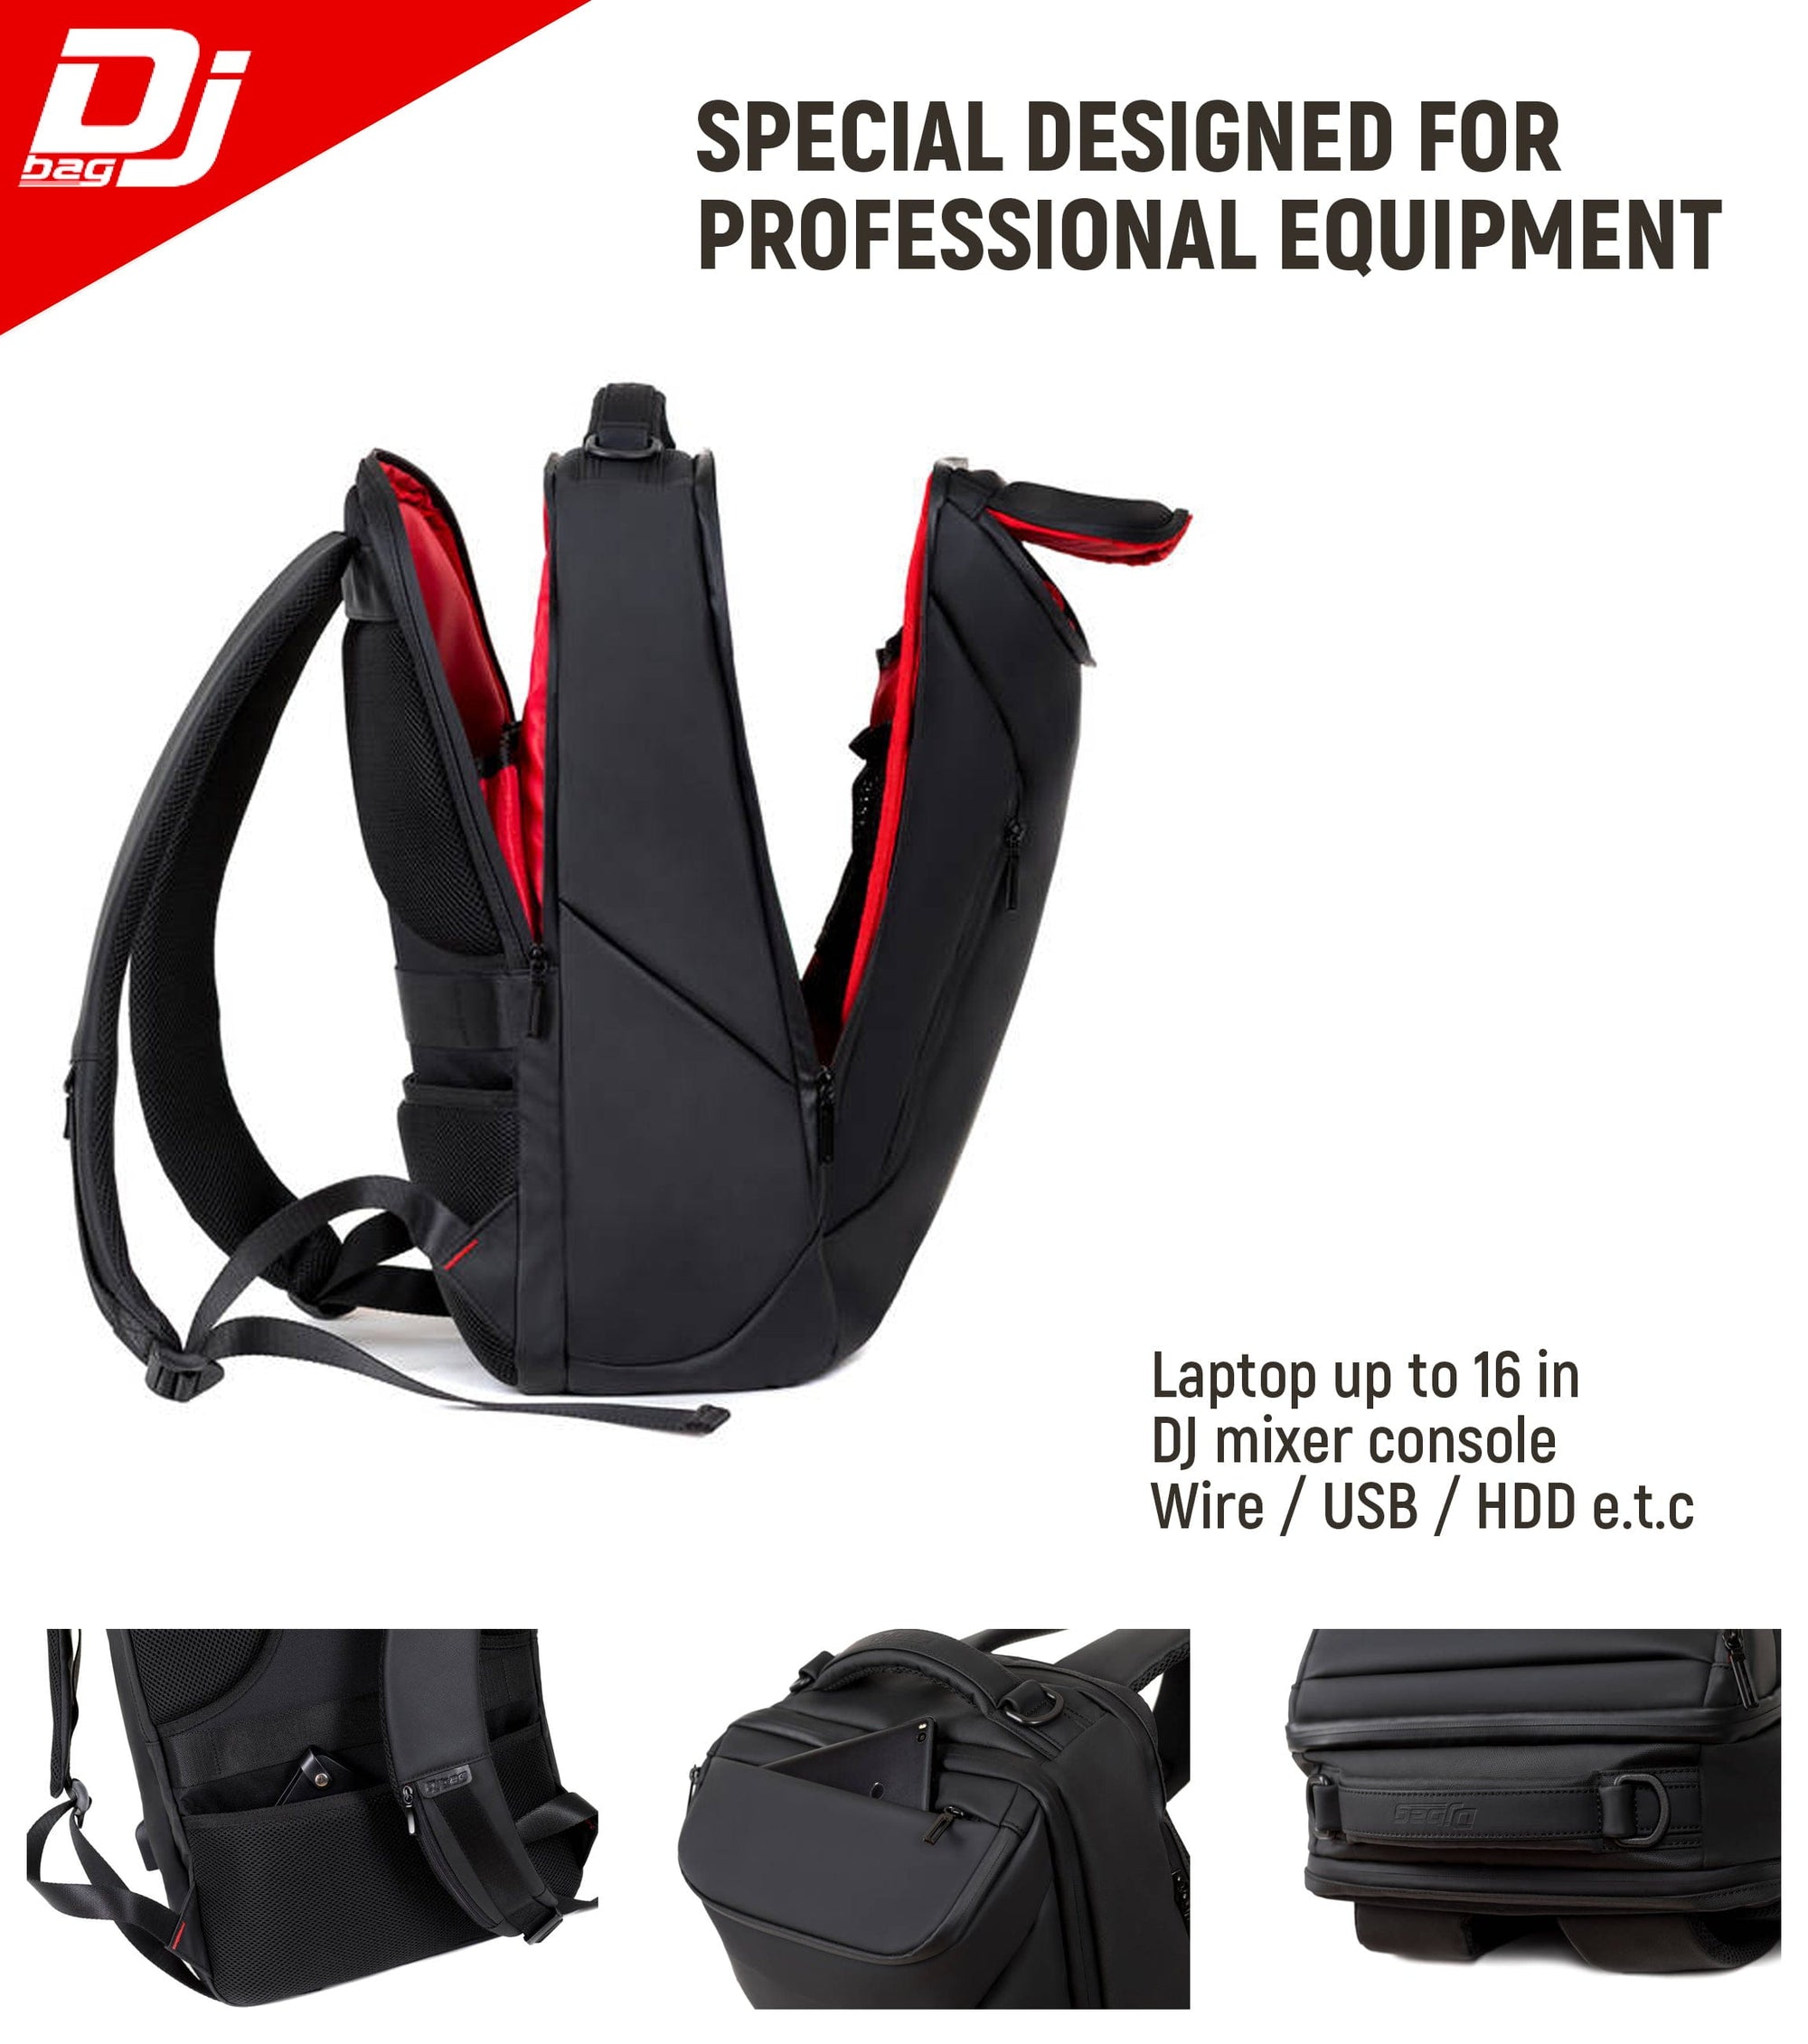 SET of URBAN Backpack & FLASHCARD bag for DJ's controllers and mixers - DJBAG 19.29 x 12.59 x 3.93 in.